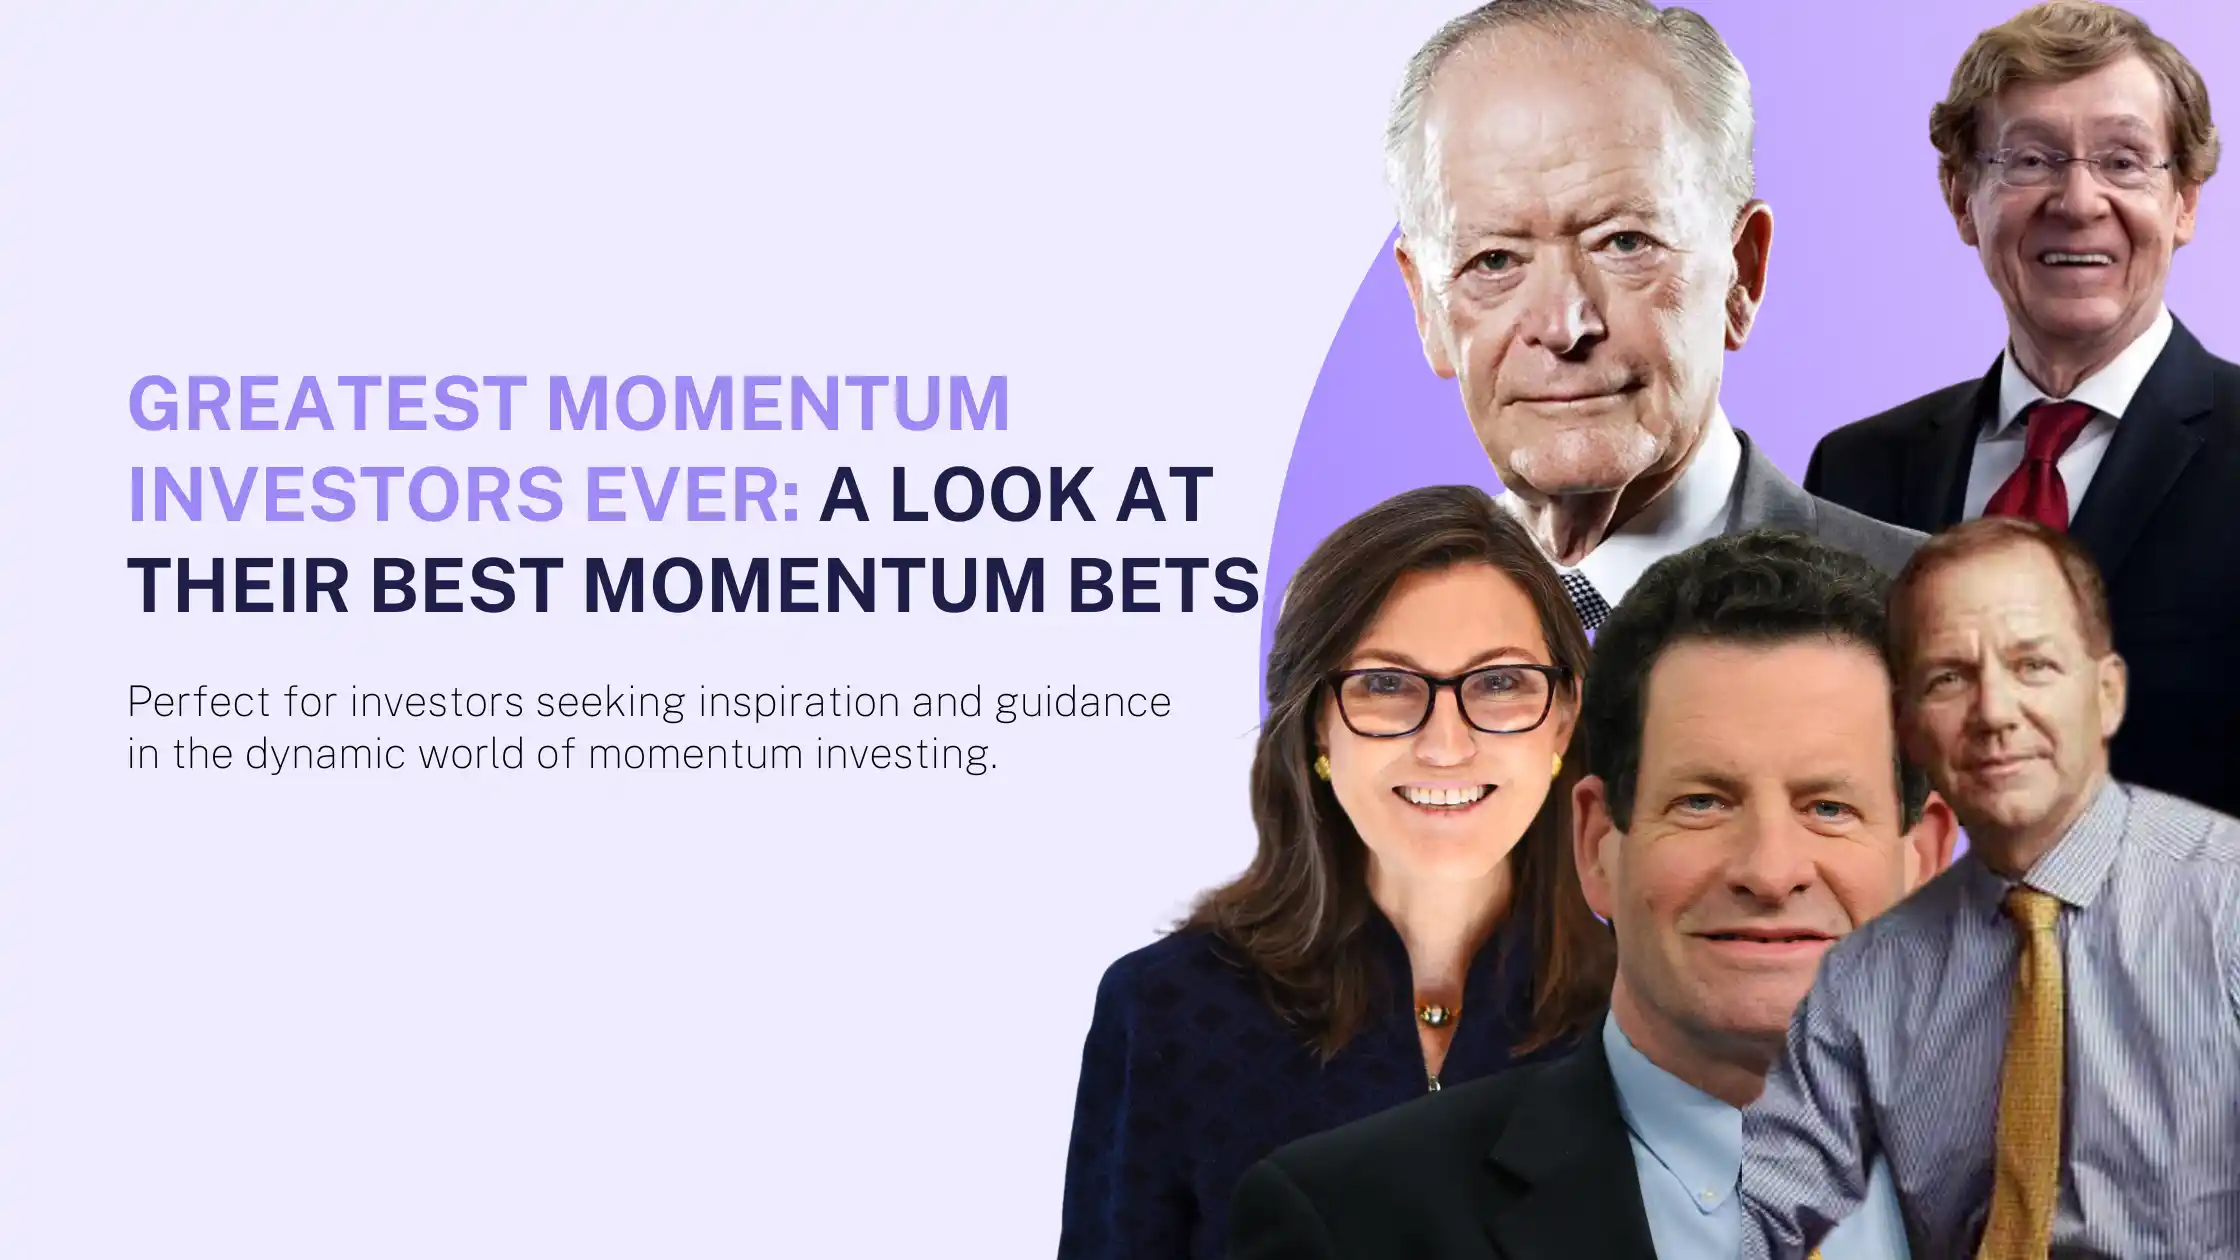 Greatest Momentum Investors Ever: A Look At Their Best Momentum Bets